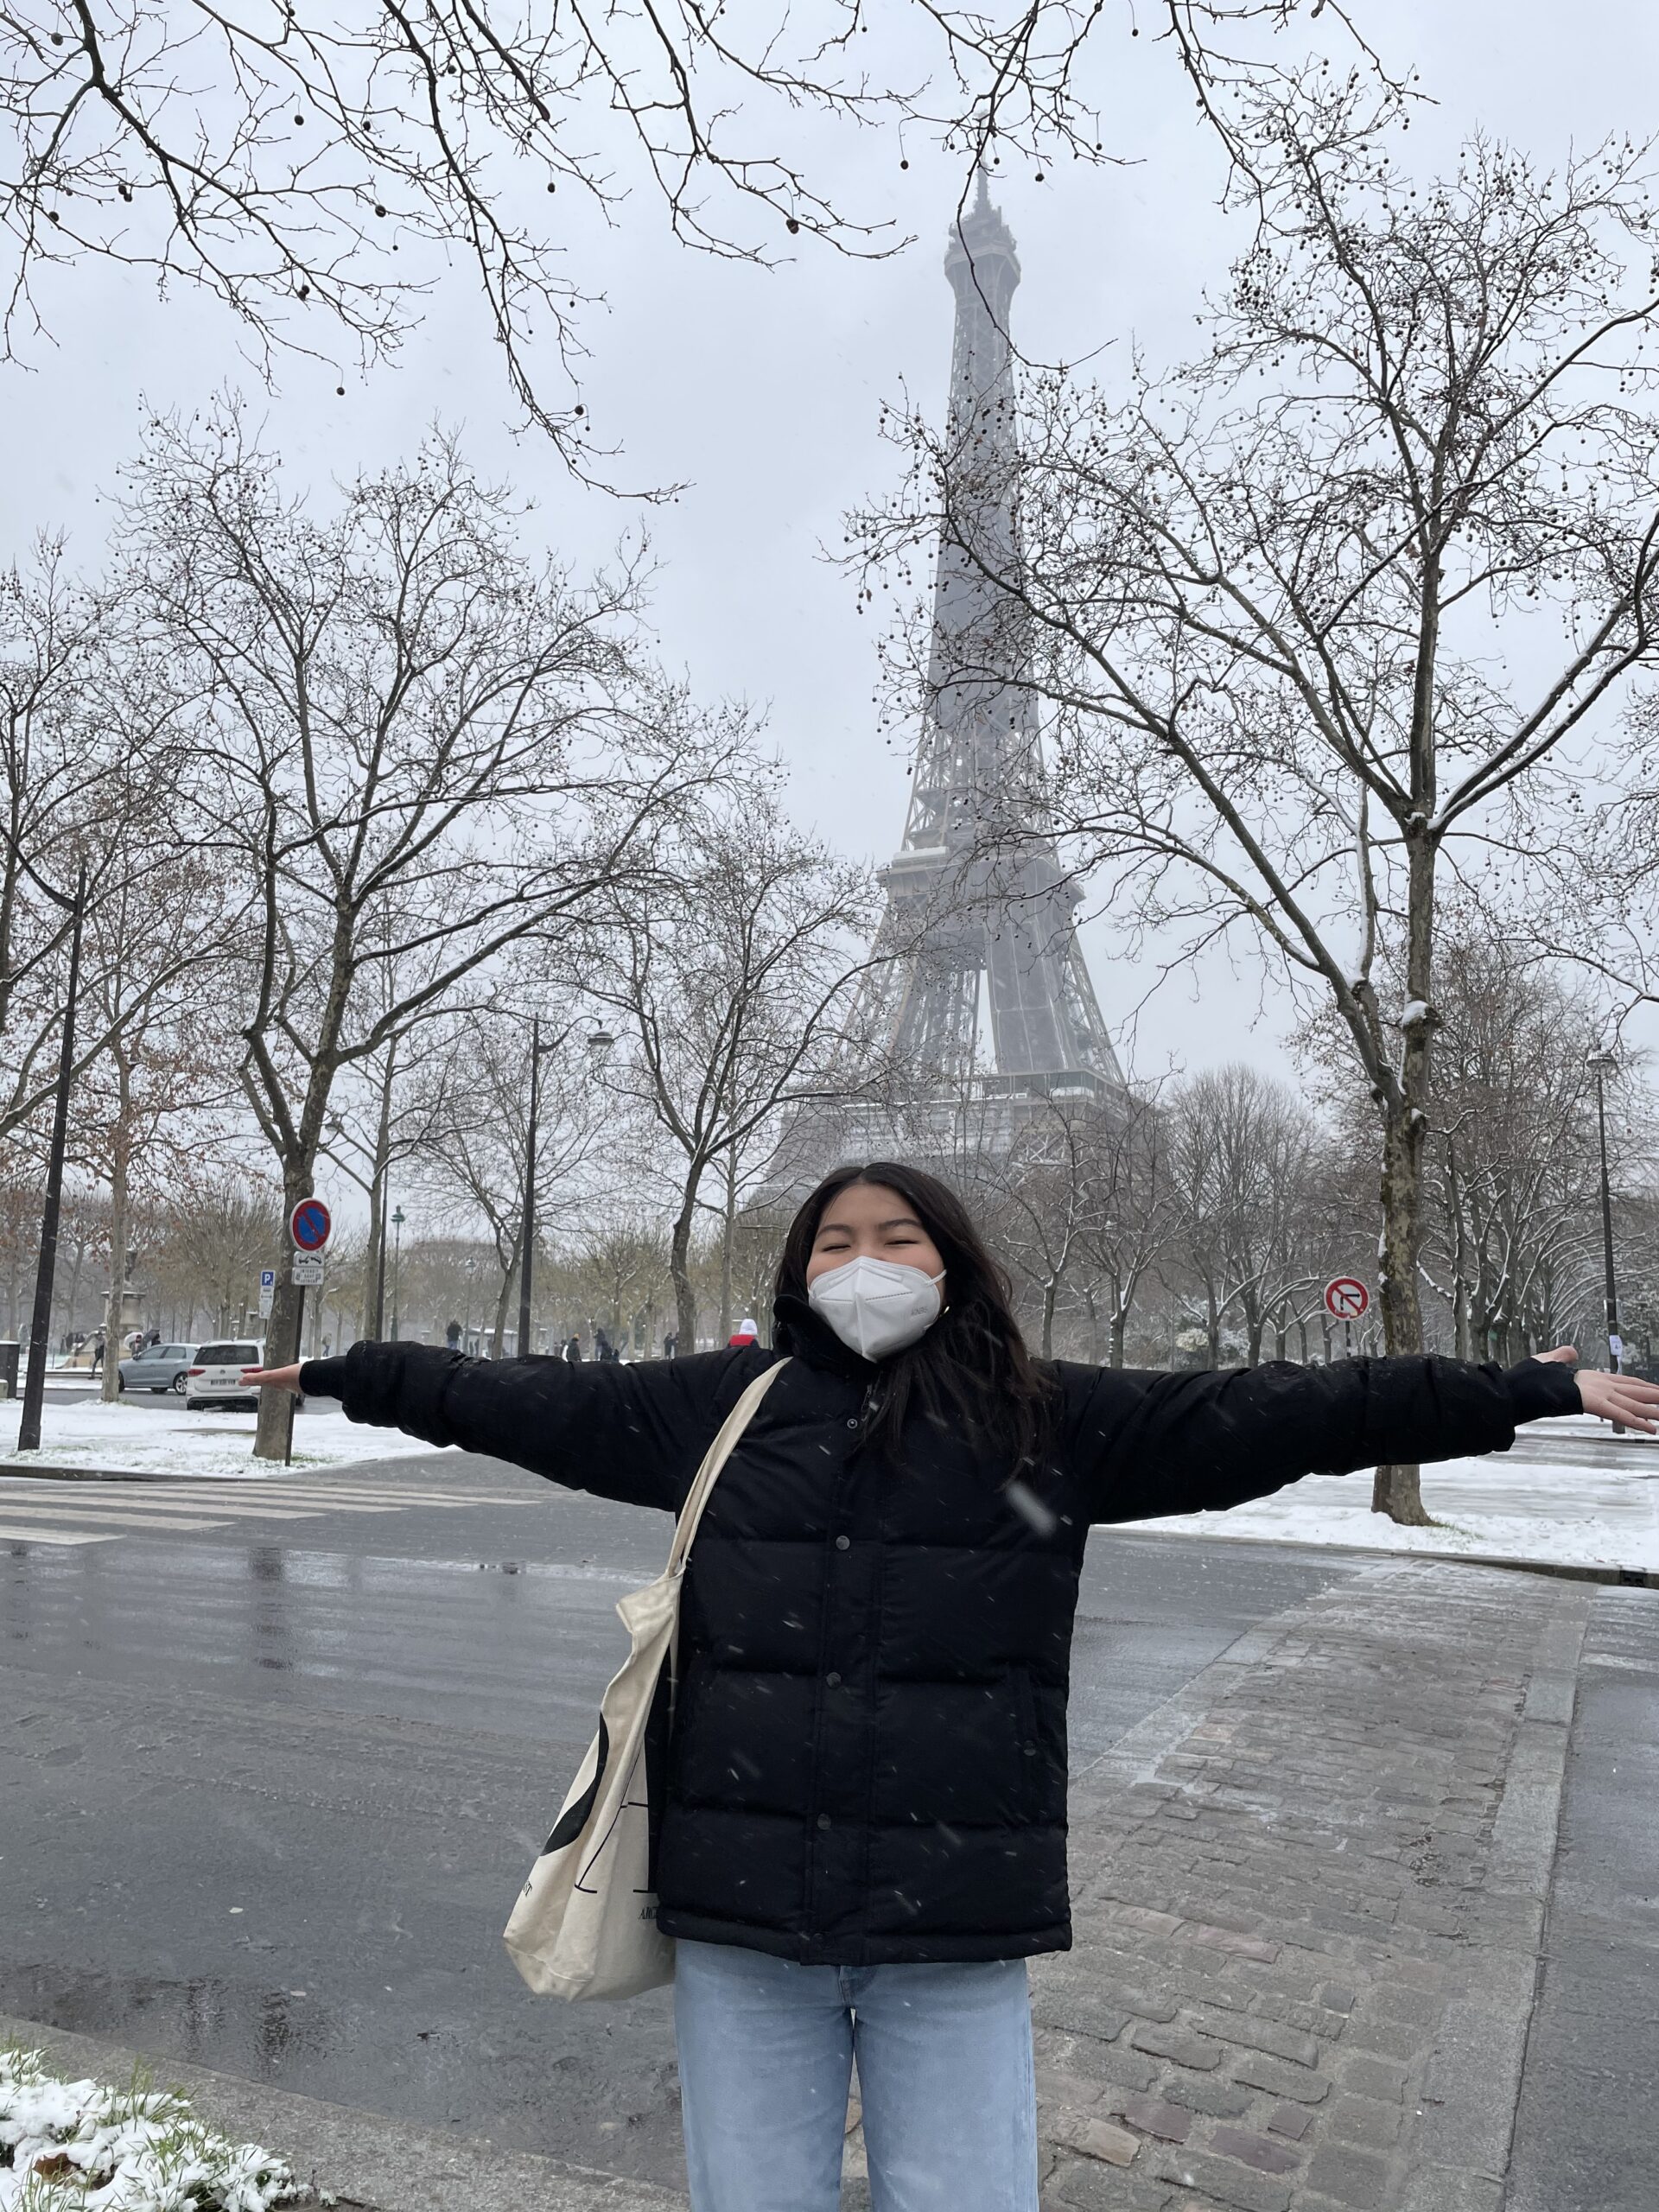 woman wearing face mask stands with outstretched arms near winter trees and eiffel tower during daytime